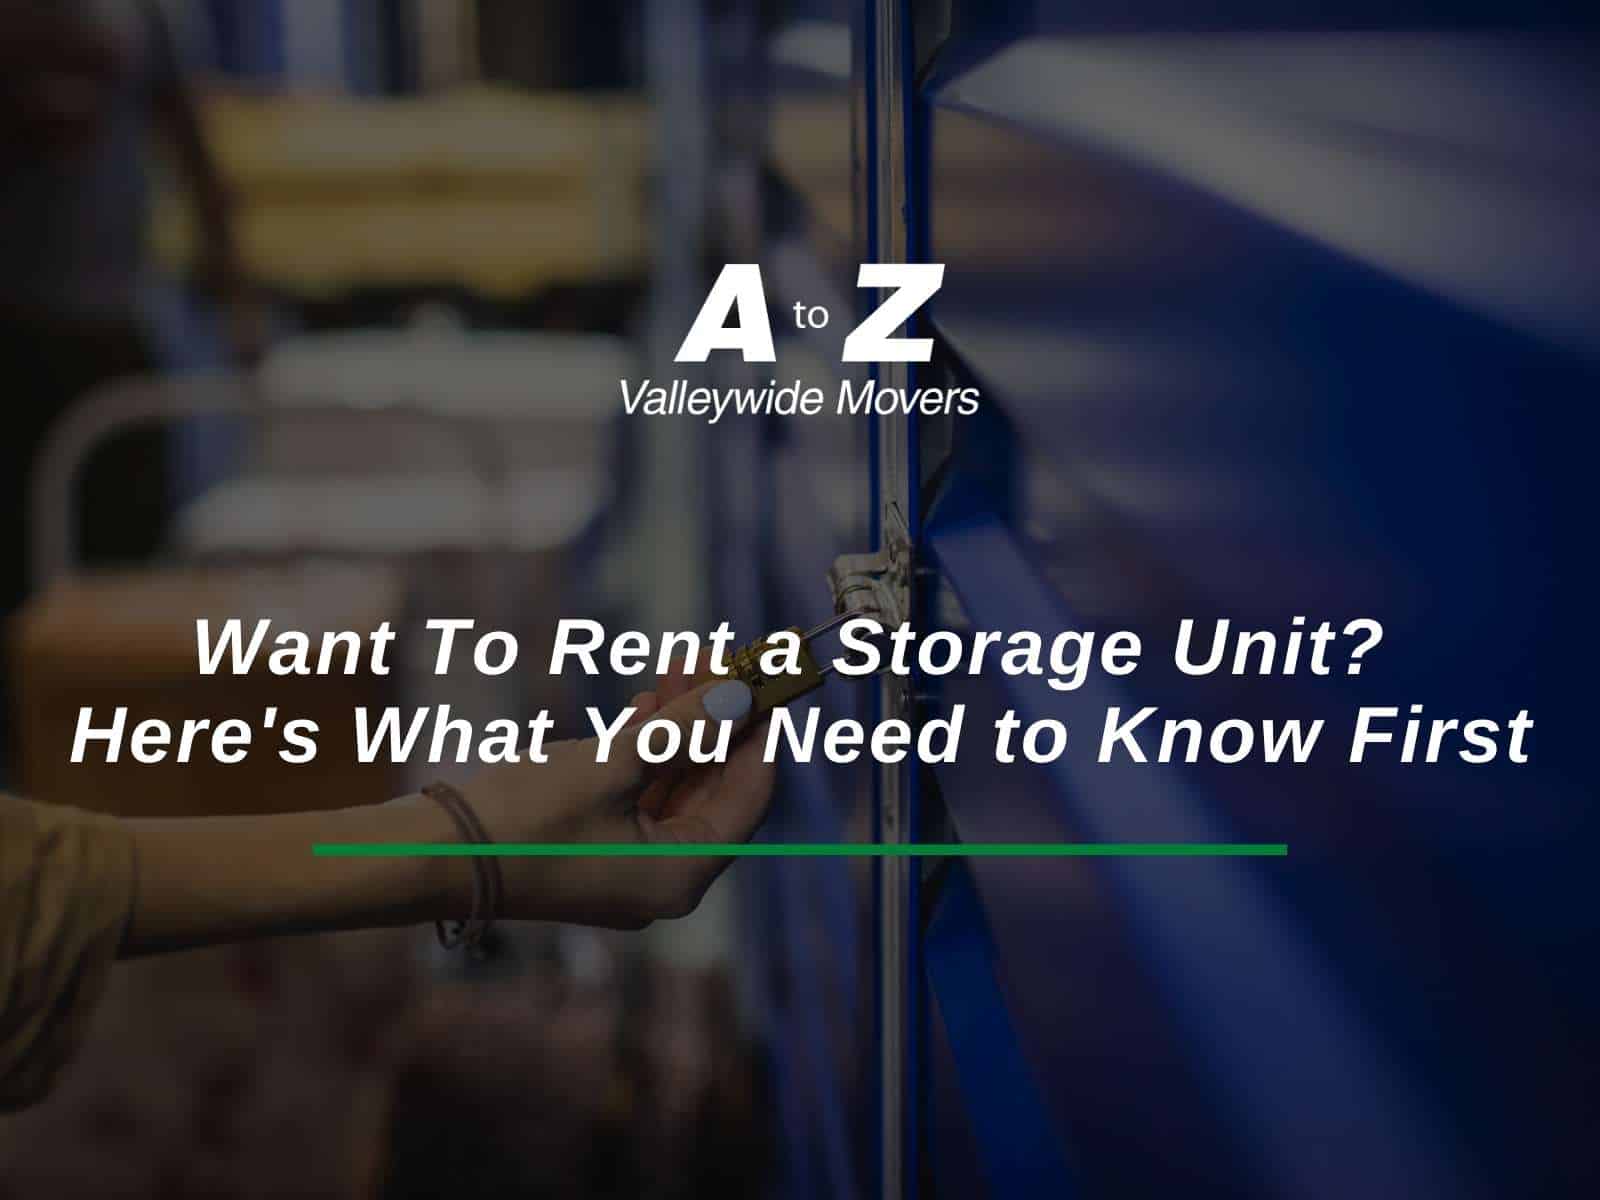 Want To Rent a Storage Unit? Here's What You Need to Know First